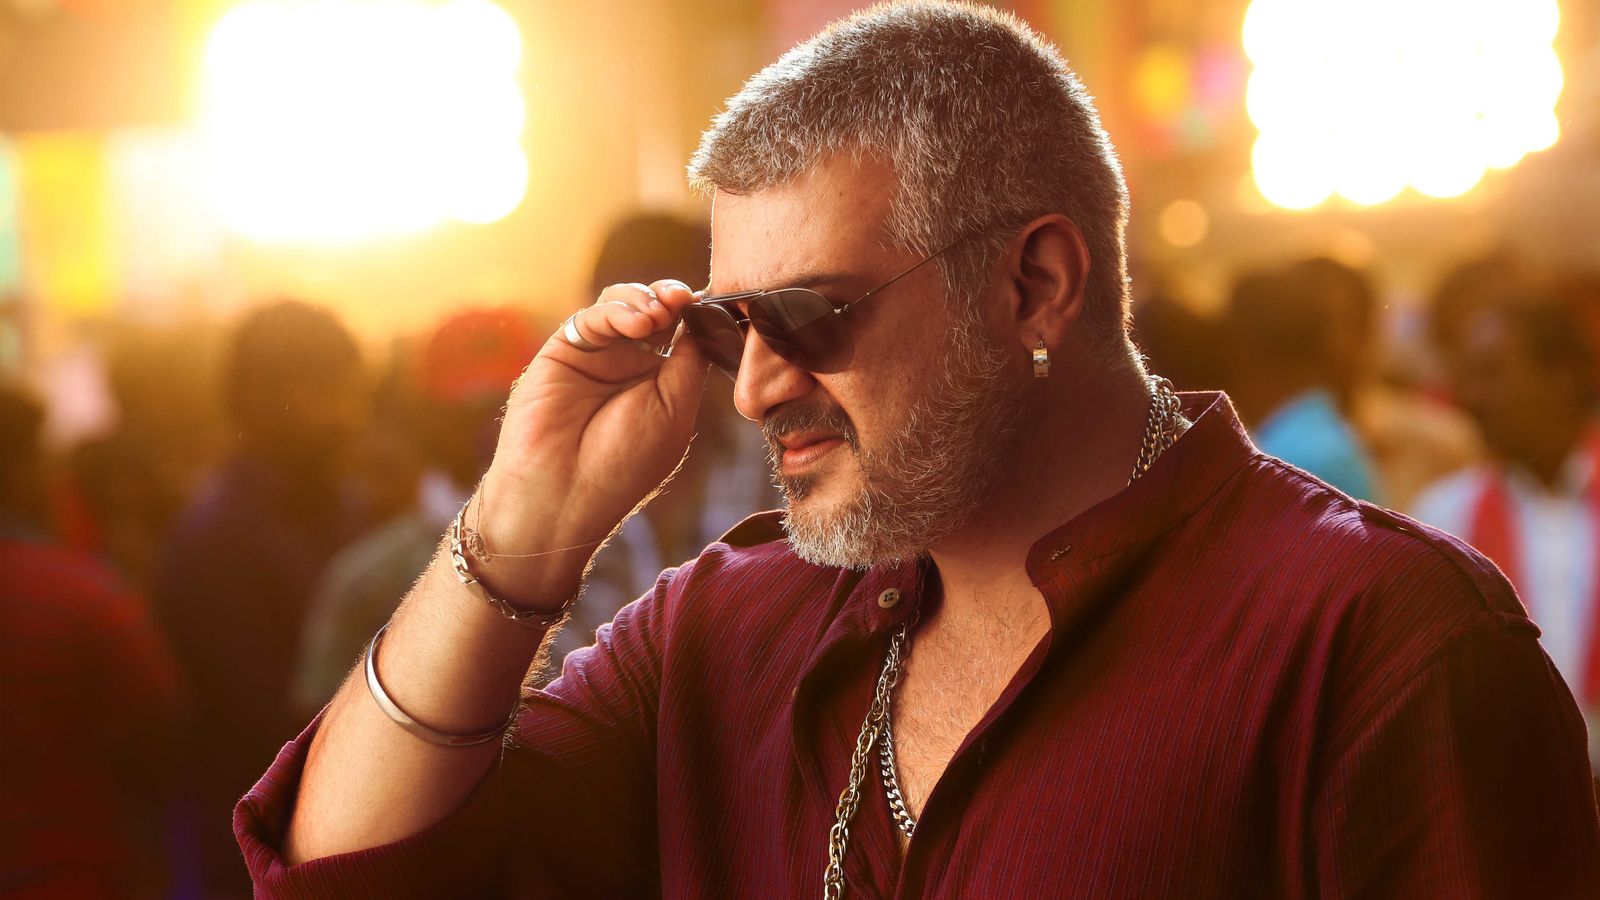 Music Of Ajith's Next Movie 'Viswasam' To Be Composed By D Imman